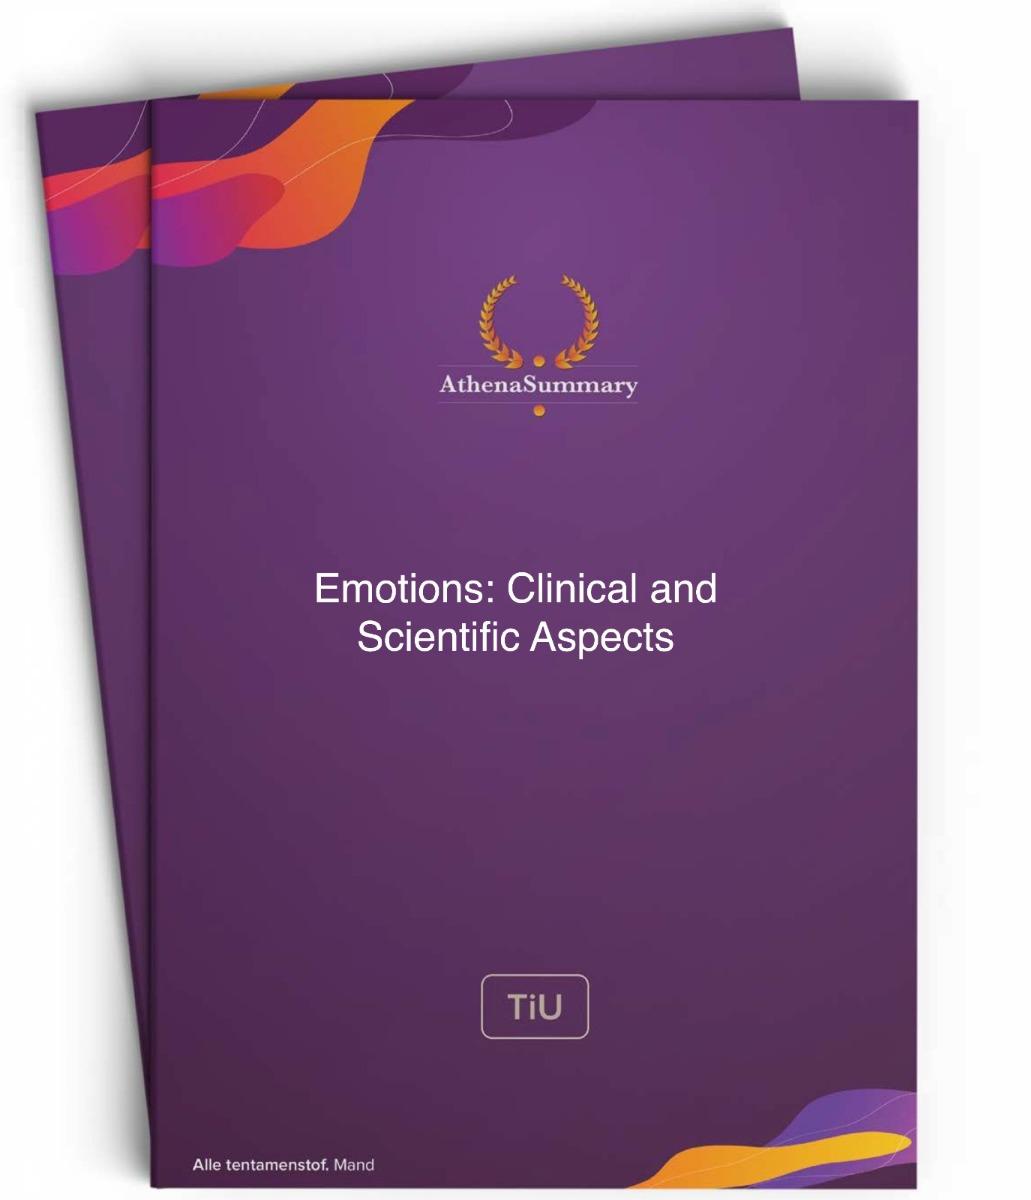 Lecture Summary: Emotions: Clinical & Scientific Aspects